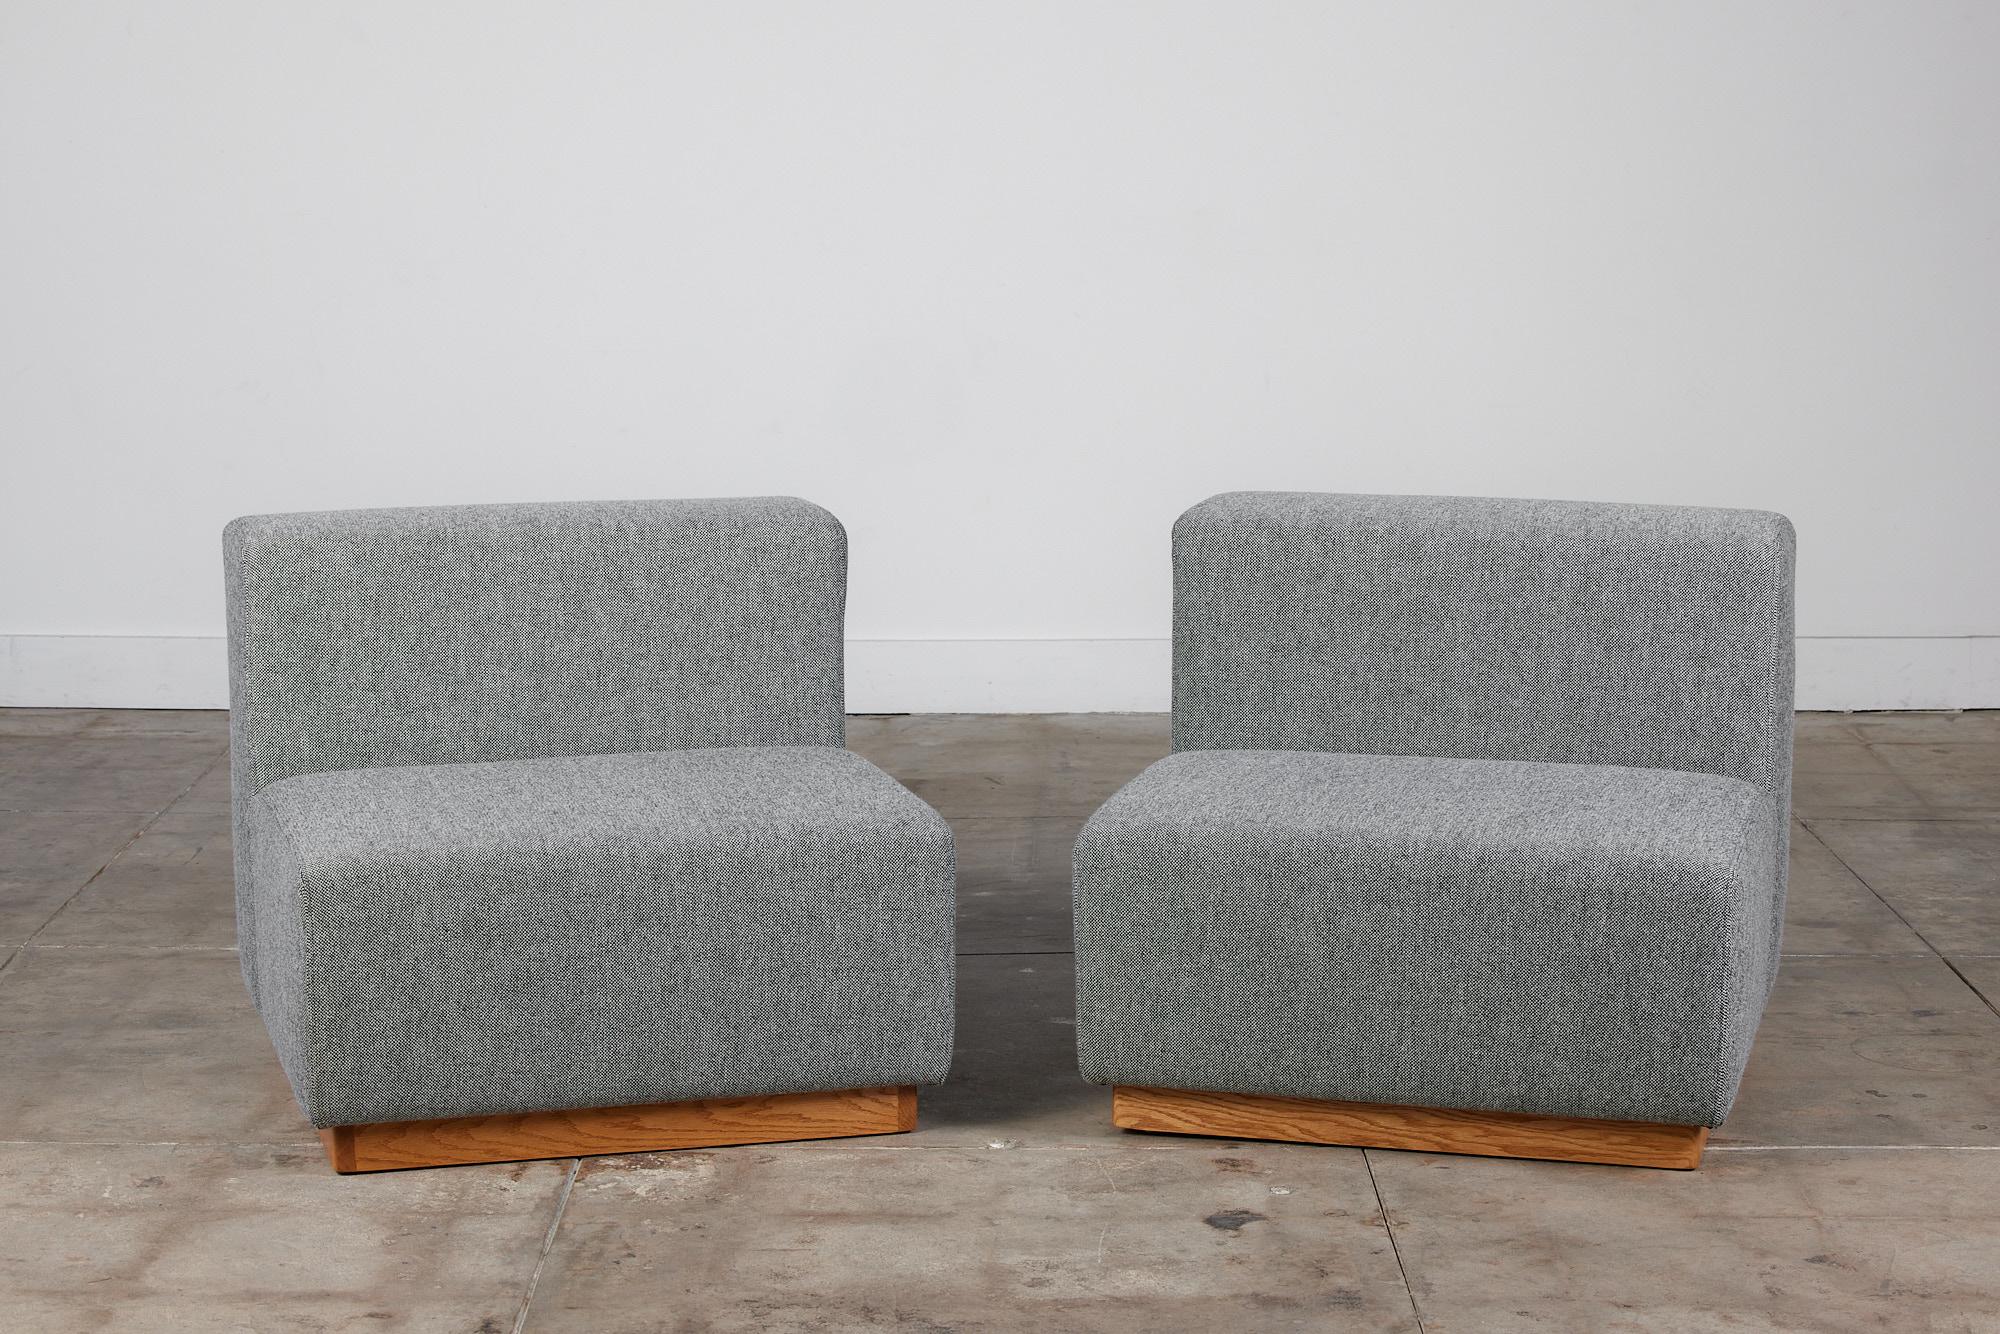 Pair of Giancarlo Piretti Style Modern Cubic Sofa Seats In Excellent Condition For Sale In Los Angeles, CA